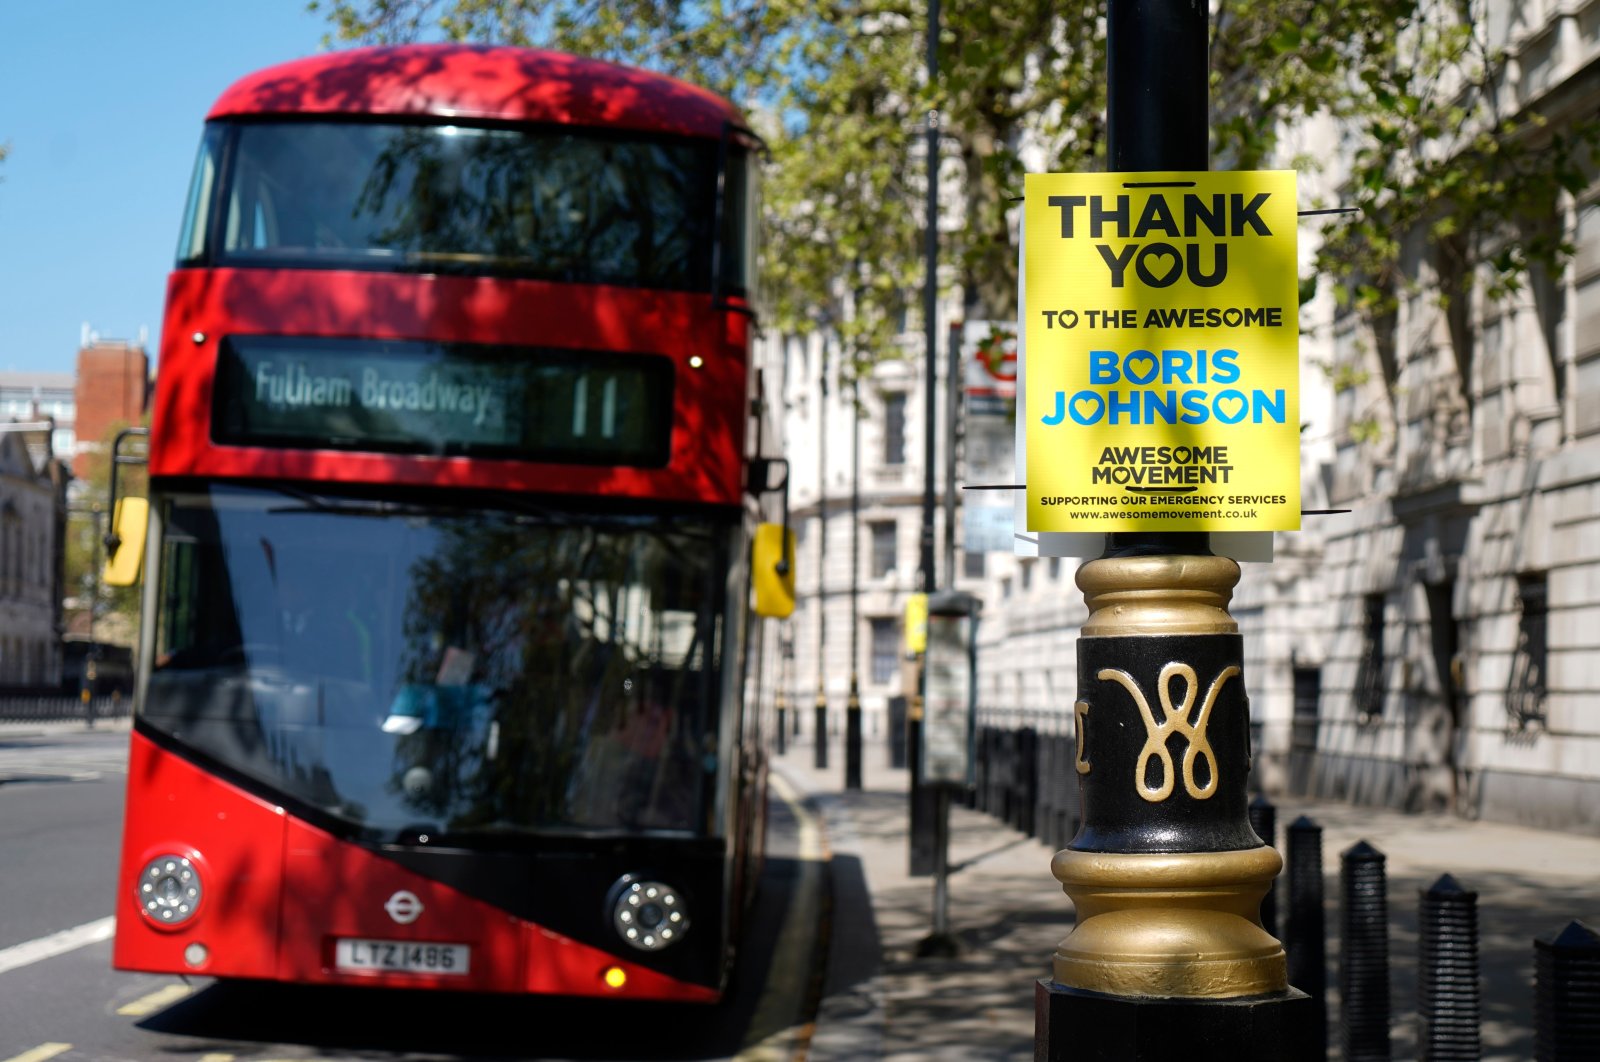 A sign in support of Britain's Prime Minister Boris Johnson is attached to a lamp post in central London, April 20, 2020. (AFP Photo)